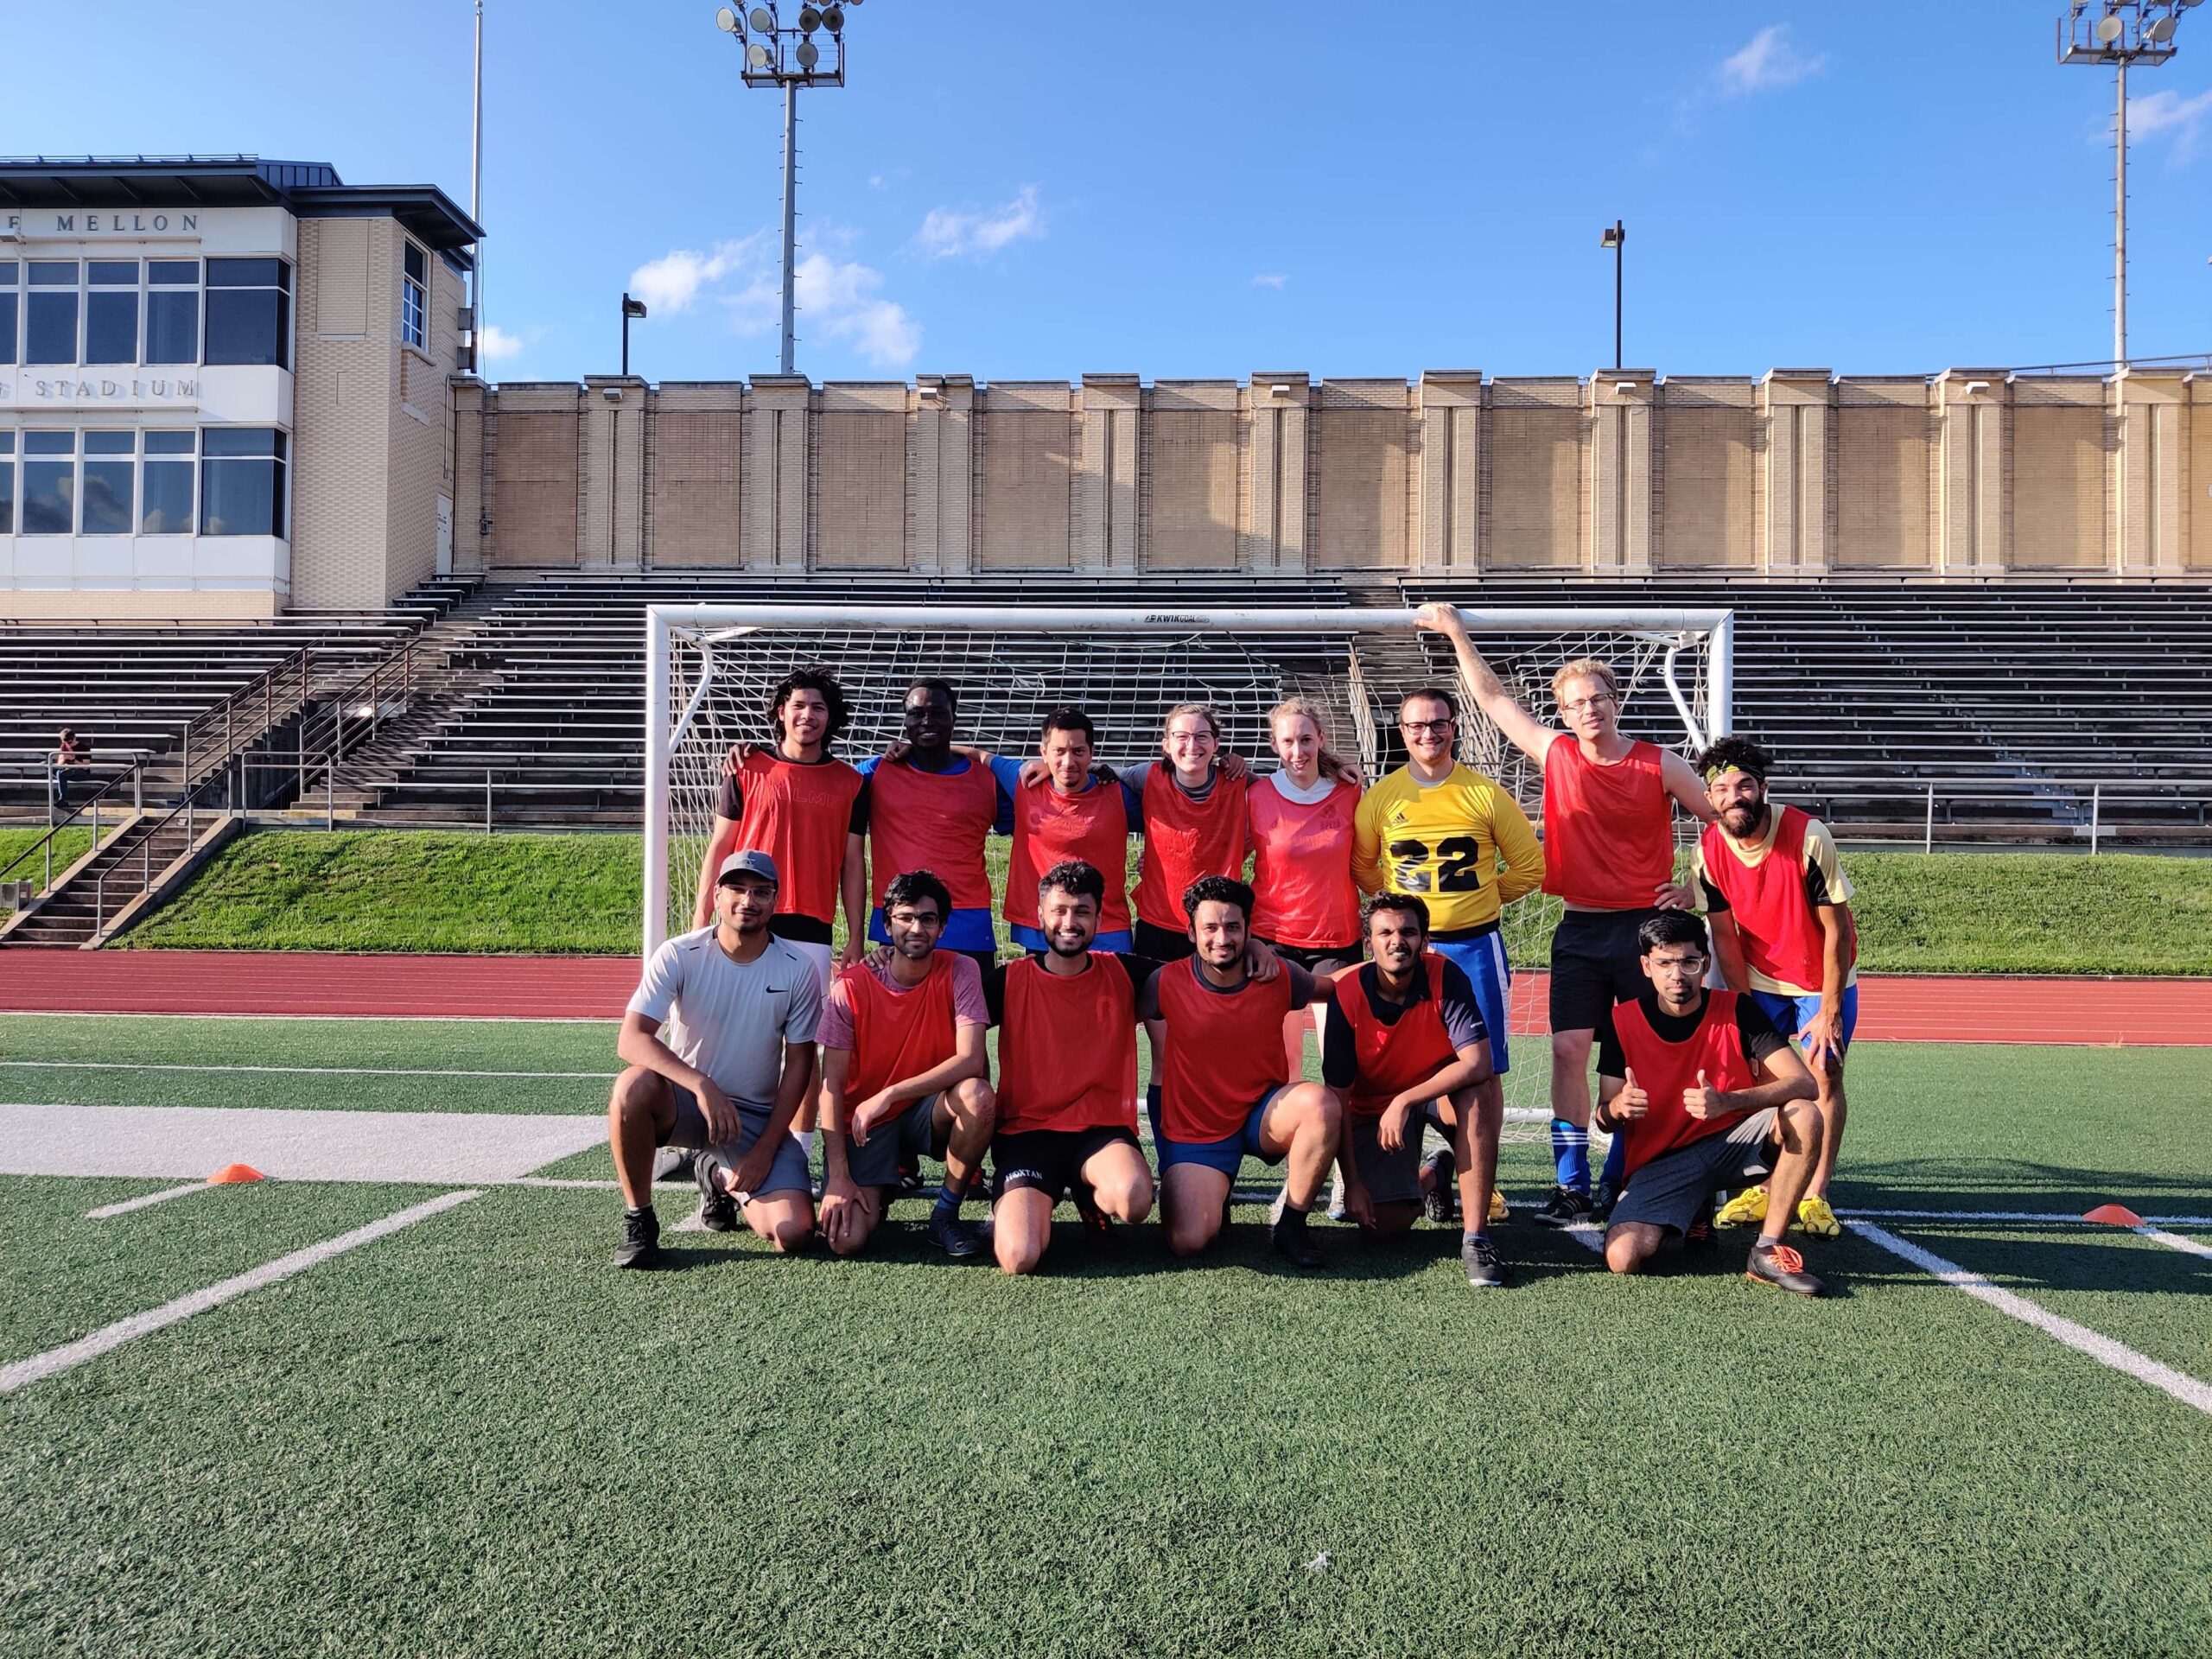 "This team is RIFC. We won the GSA Summer Soccer League. We were losing the first game 3-0 at half time. We scored 1 in the second half to make it 3-1. Since then, we went on to win every game but one and eventually lift the trophy. I scored a goal with my head and also an own goal. It was a good experience getting to know people from multiple departments and having a more routine of playing the game I love."